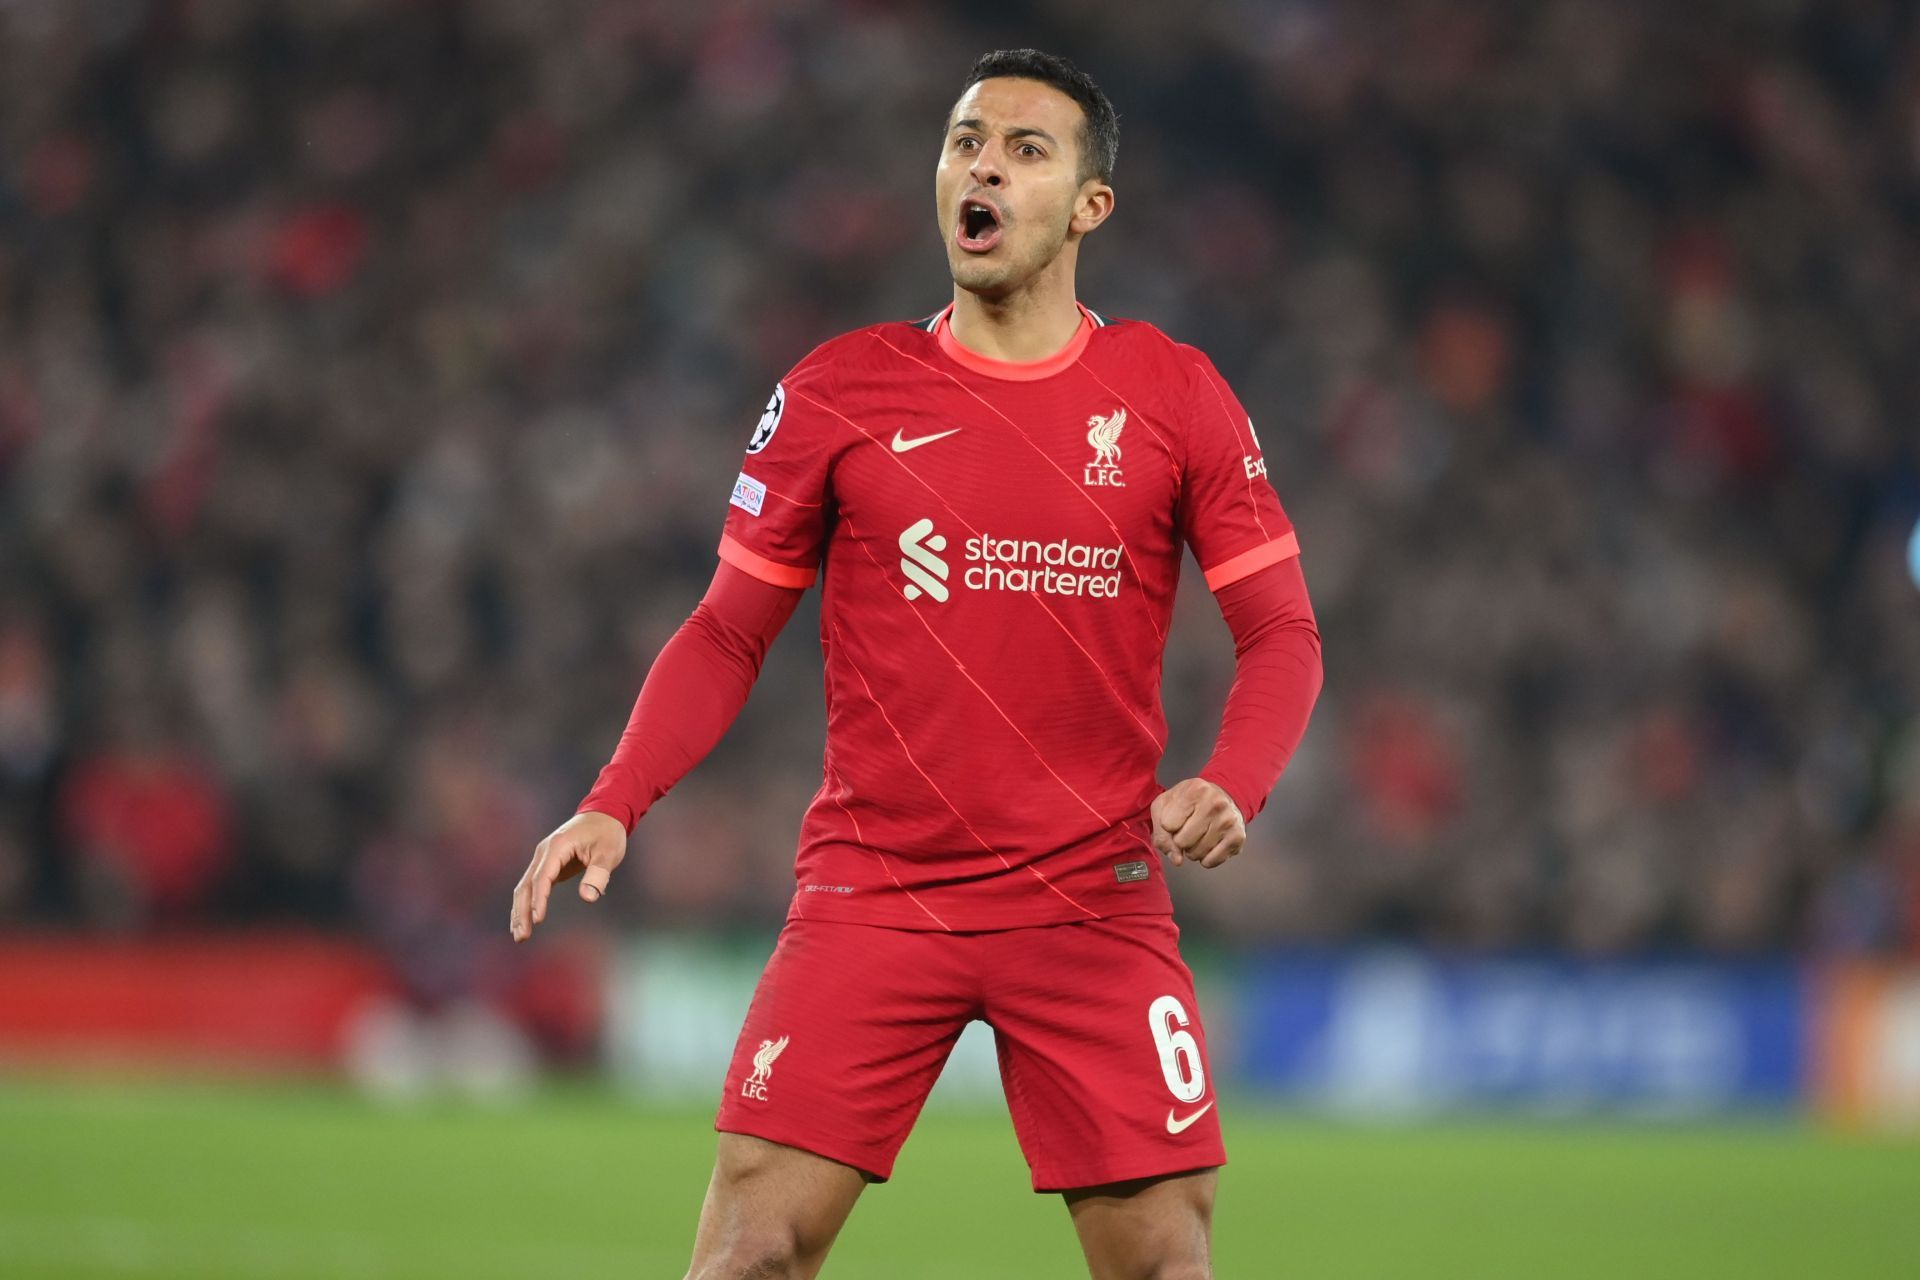 Thiago continued his stunning form for the Reds